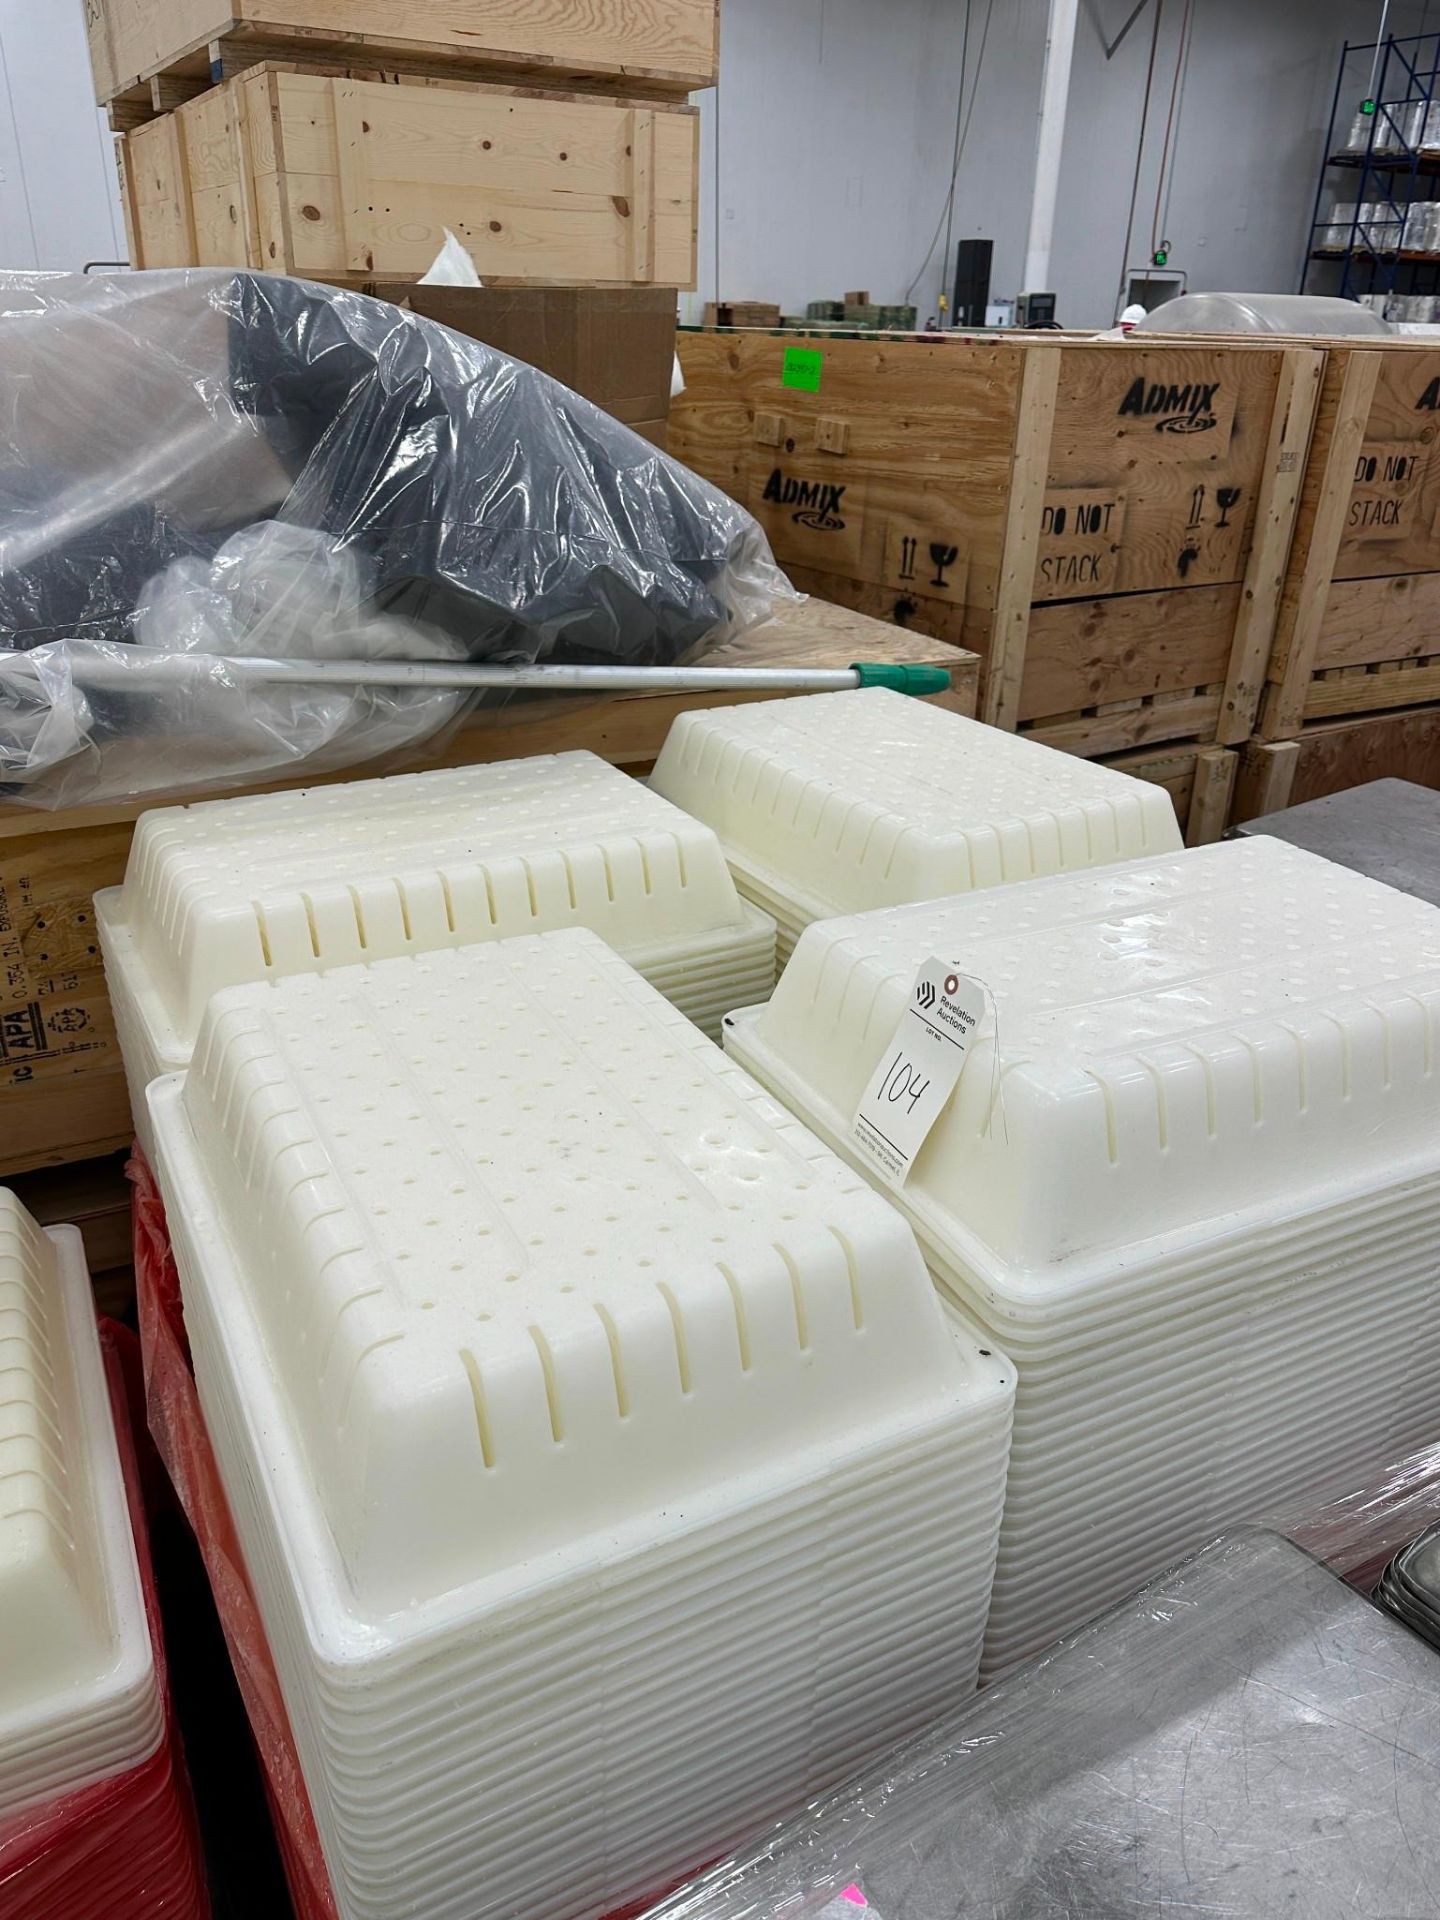 SKID OF PERFORATED PLASTIC TRAYS - Image 3 of 3